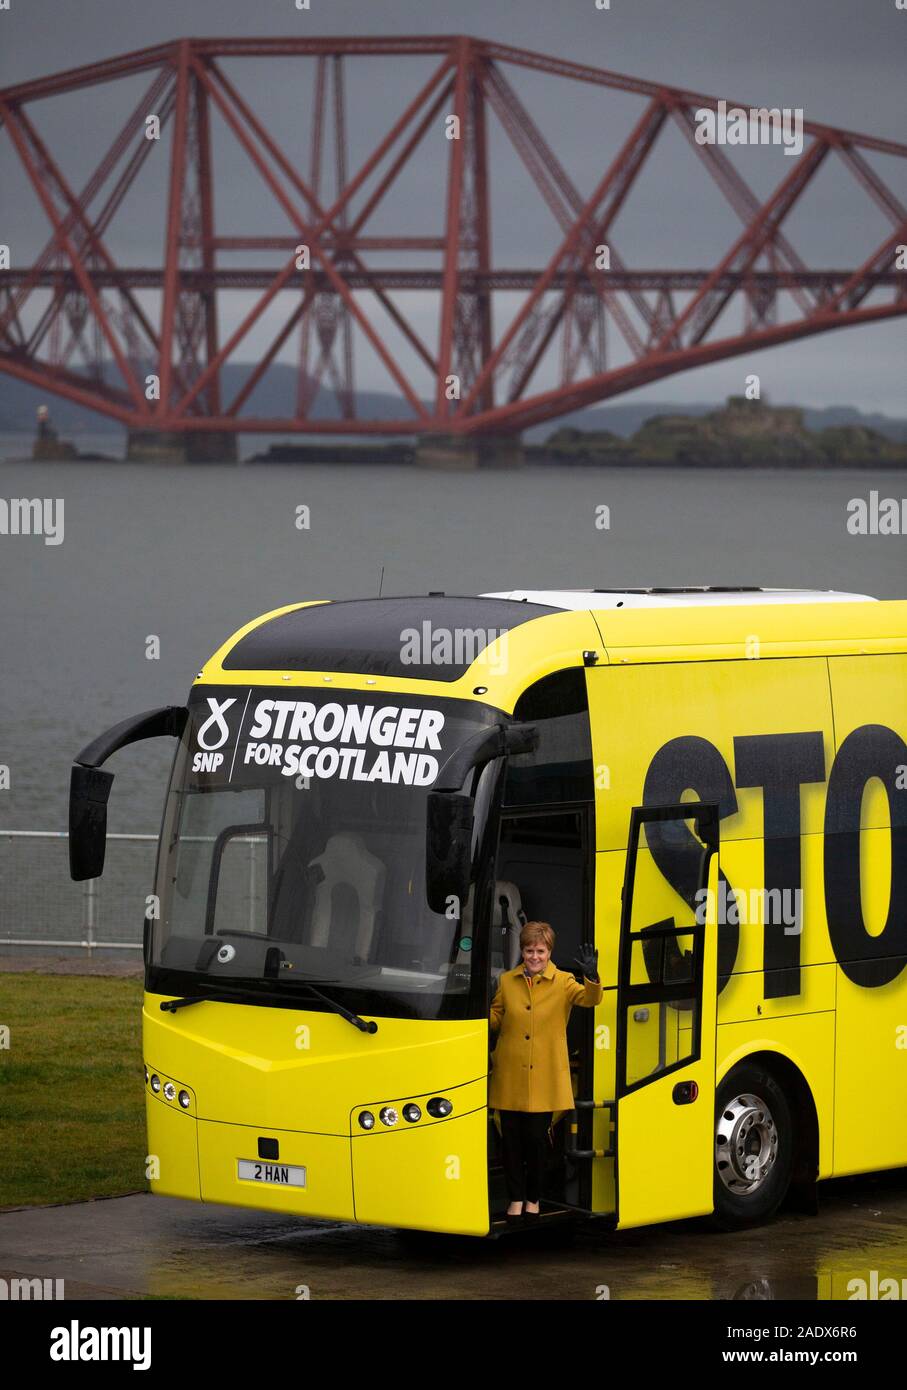 SNP leader Nicola Sturgeon with the SNP campaign bus in front of the Forth Bridge, while on the General Election campaign trail in Scotland. Stock Photo